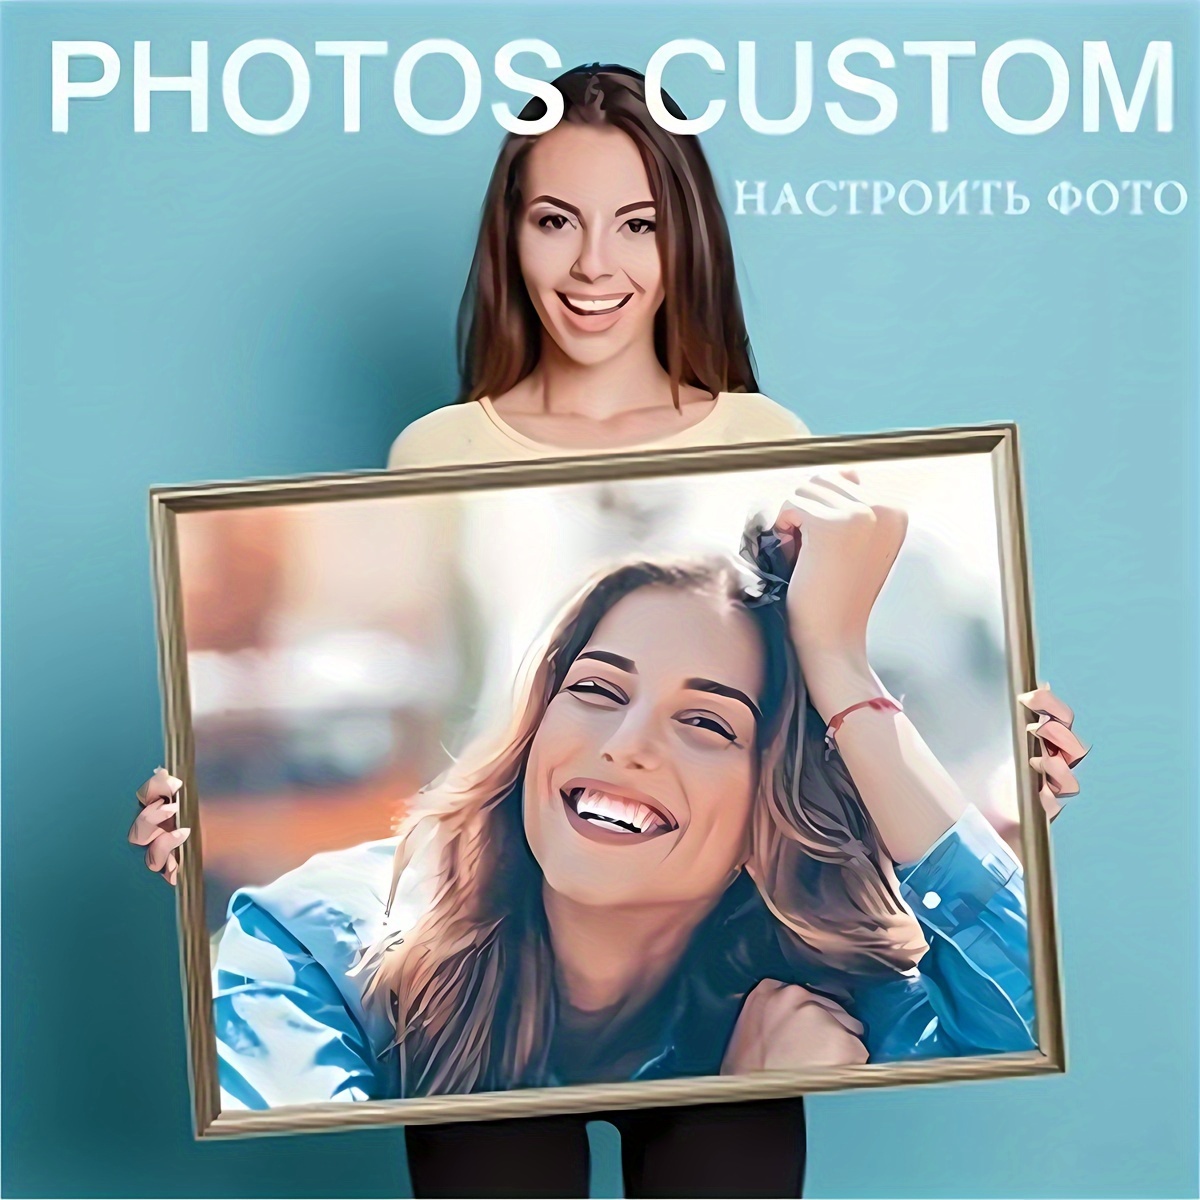 

Create Personalized 5d Diy Diamond Art Painting, Customize Digital Painting Kit, Customize Home Decor Diamond Art, Unique Gift With Your Own Photo, Round Diamond 40*40cm/15.7*15.7in